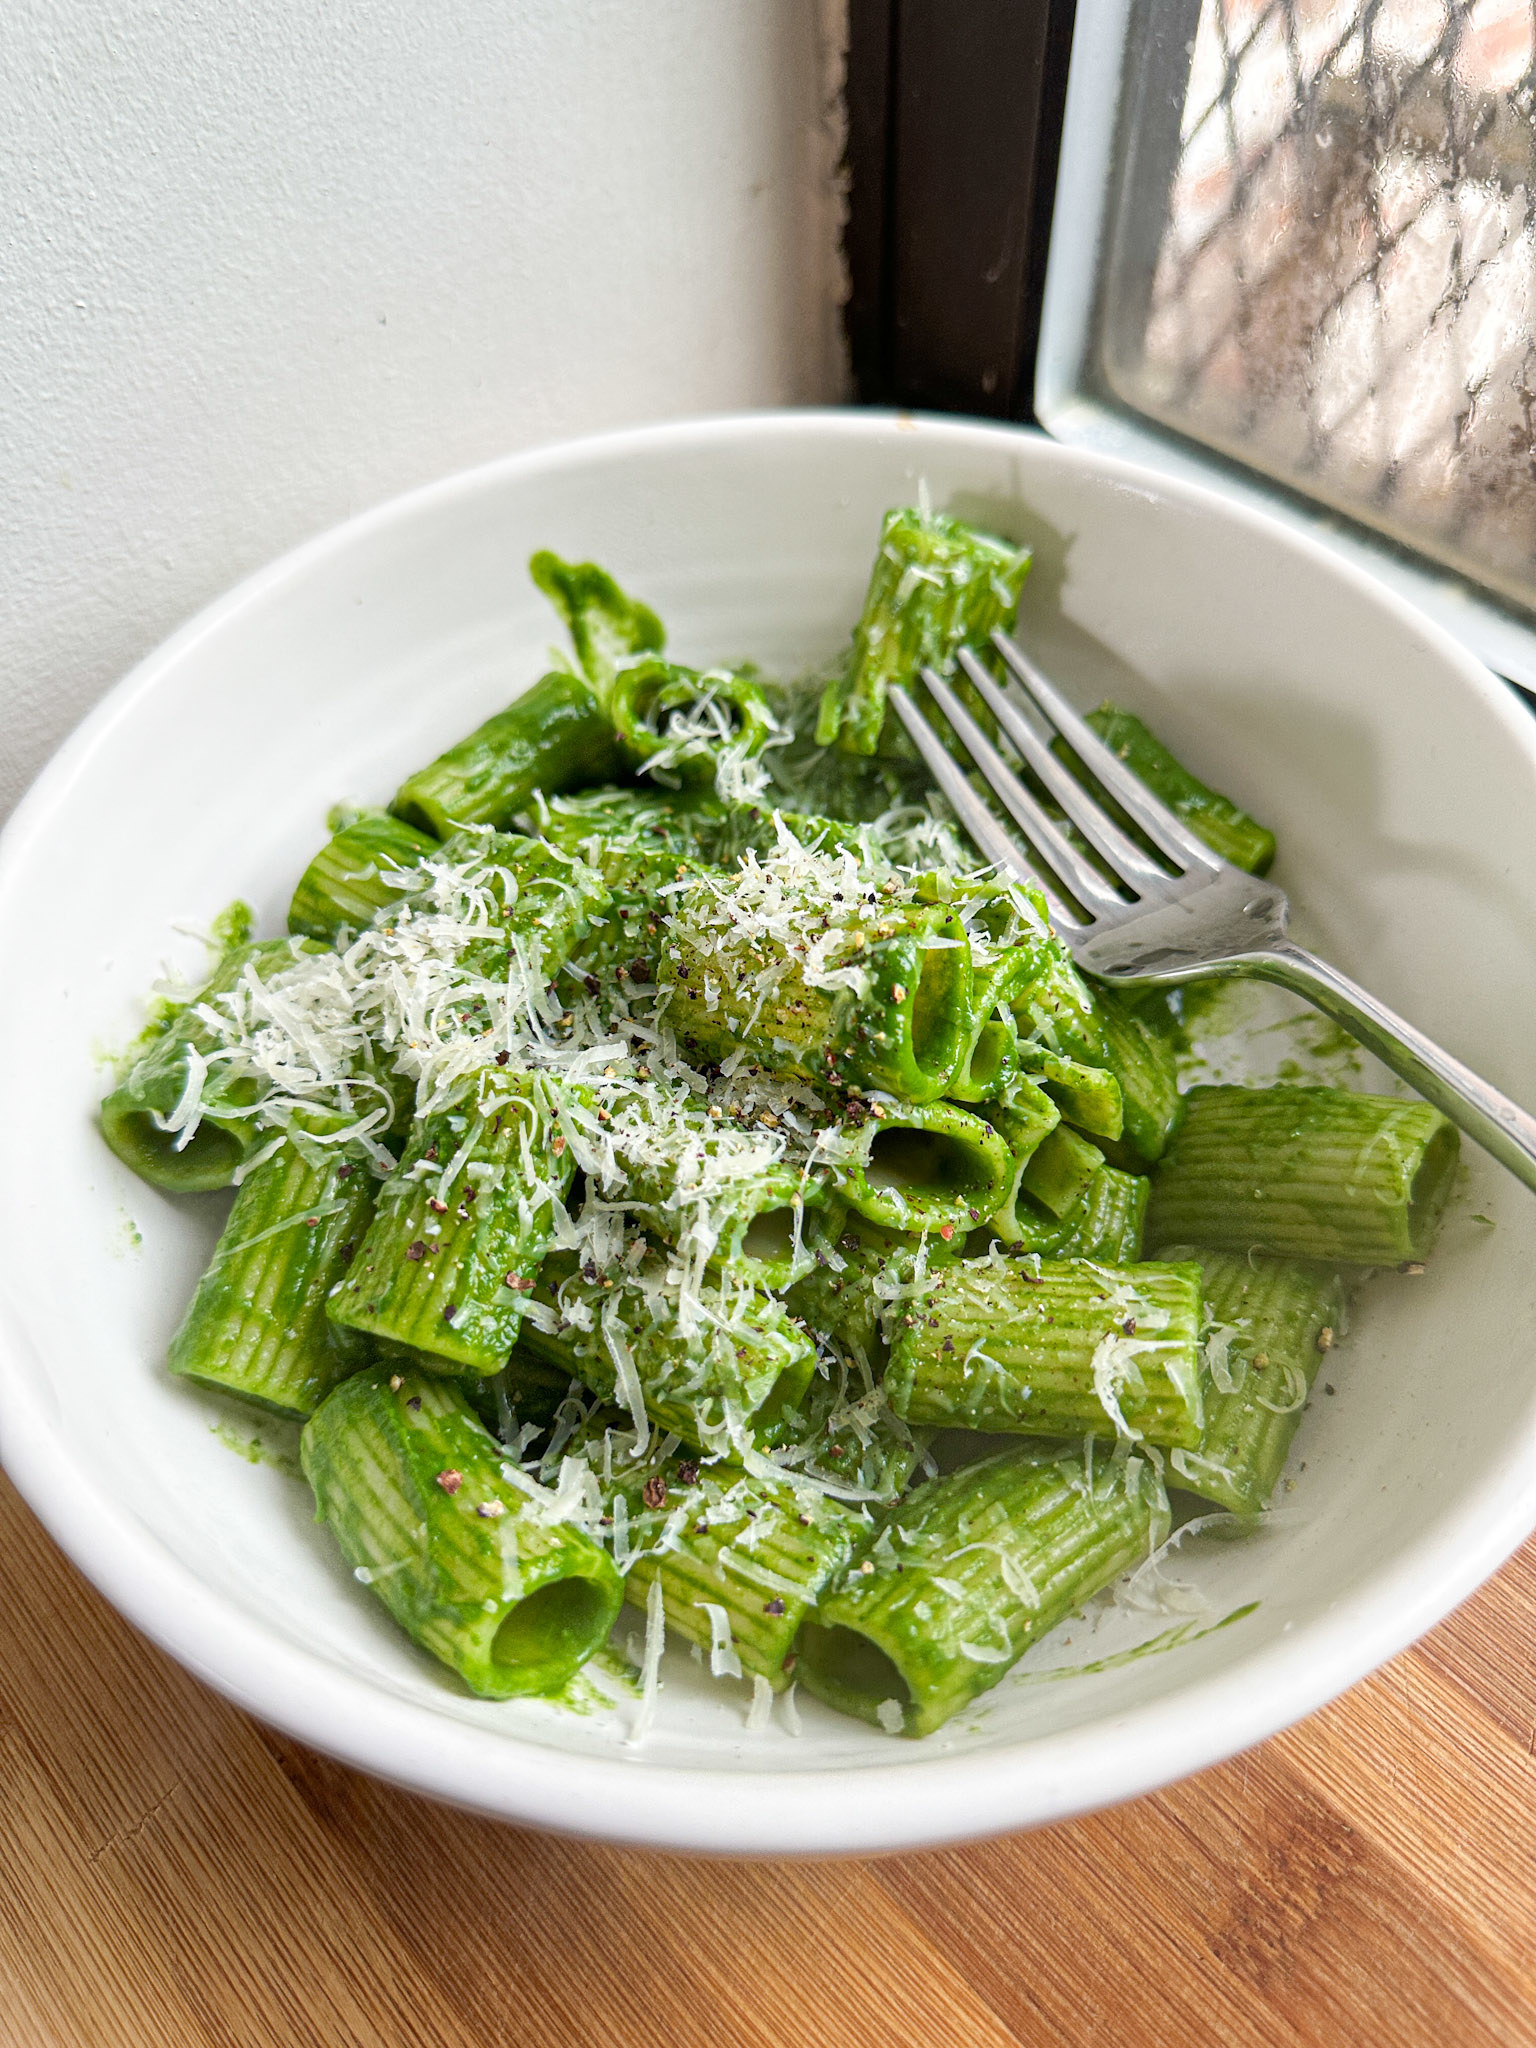 rigatoni pasta coated in a vibrant green sauce with parmesan cheese and black pepper